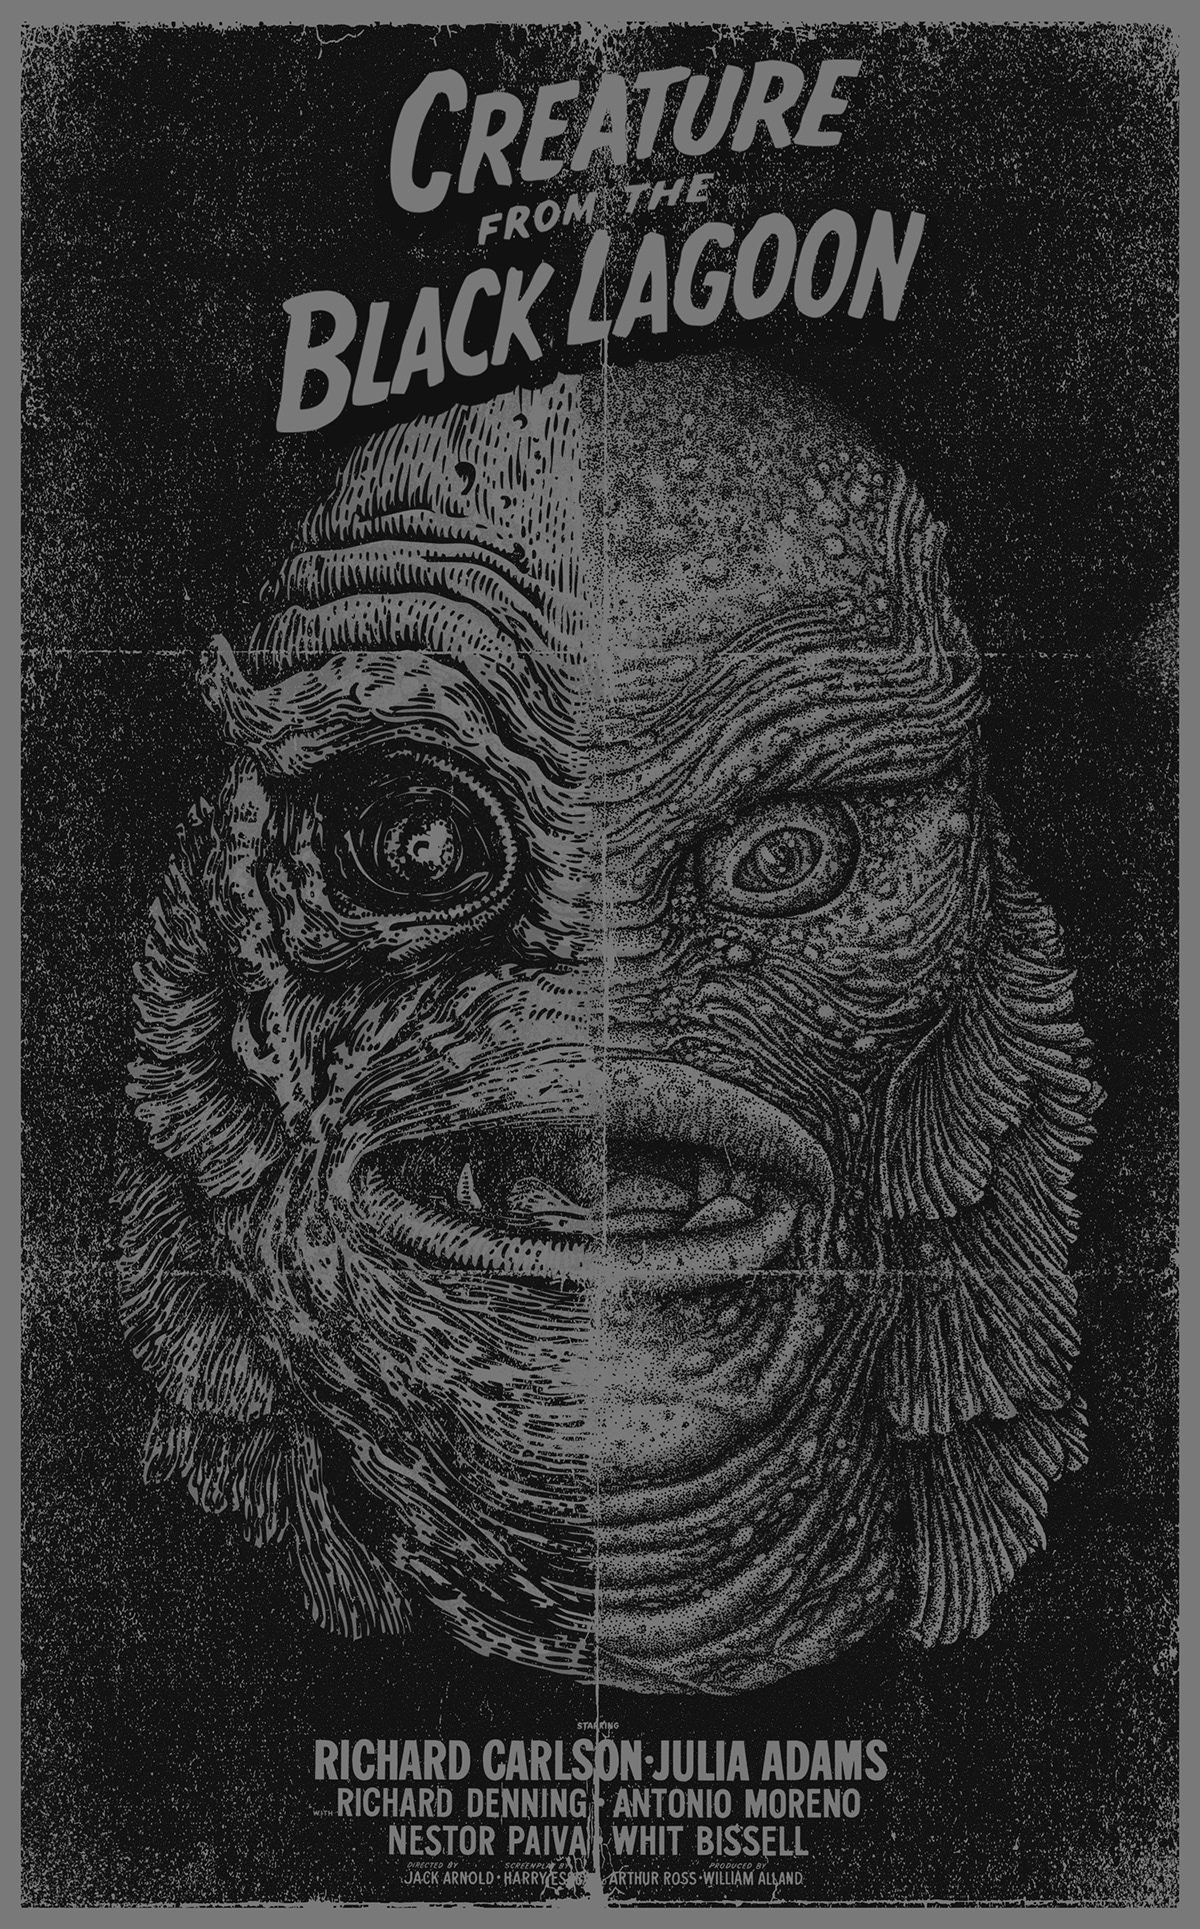 poster movie Classic Pestmeester abacrombieink creature black lagoon midtones gray Collaboration